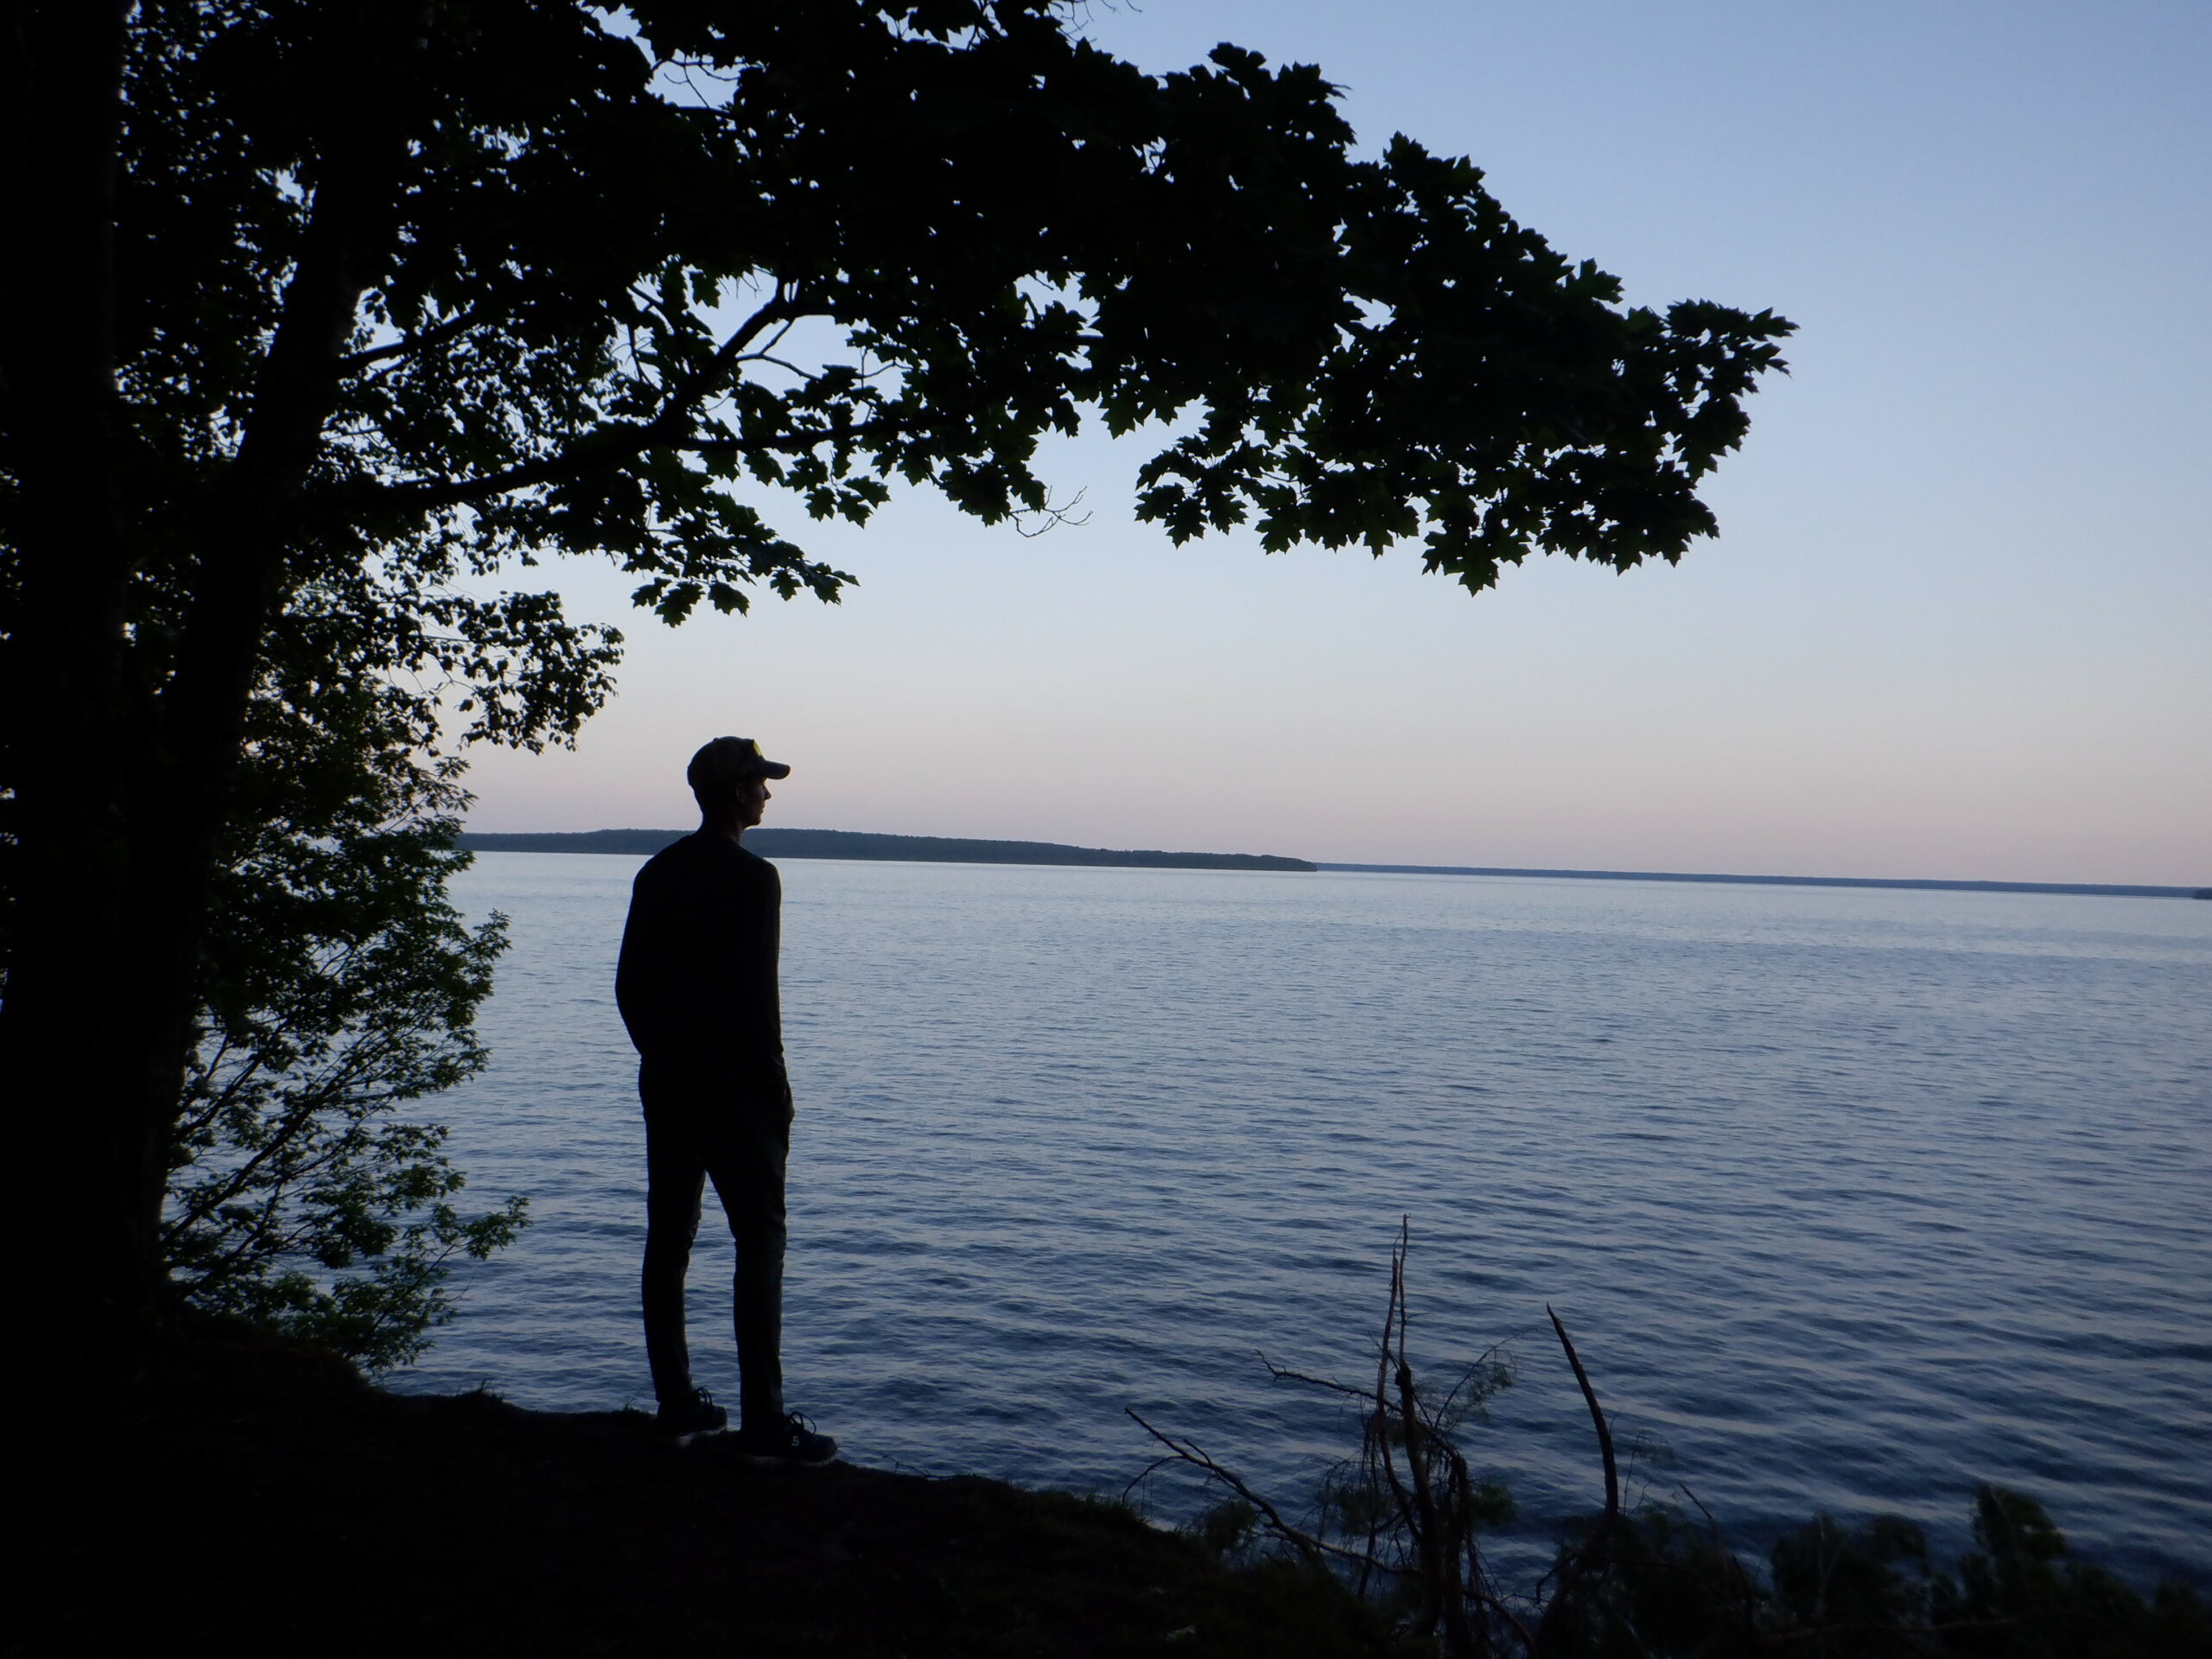 A camper experiences peace on Lake Superior